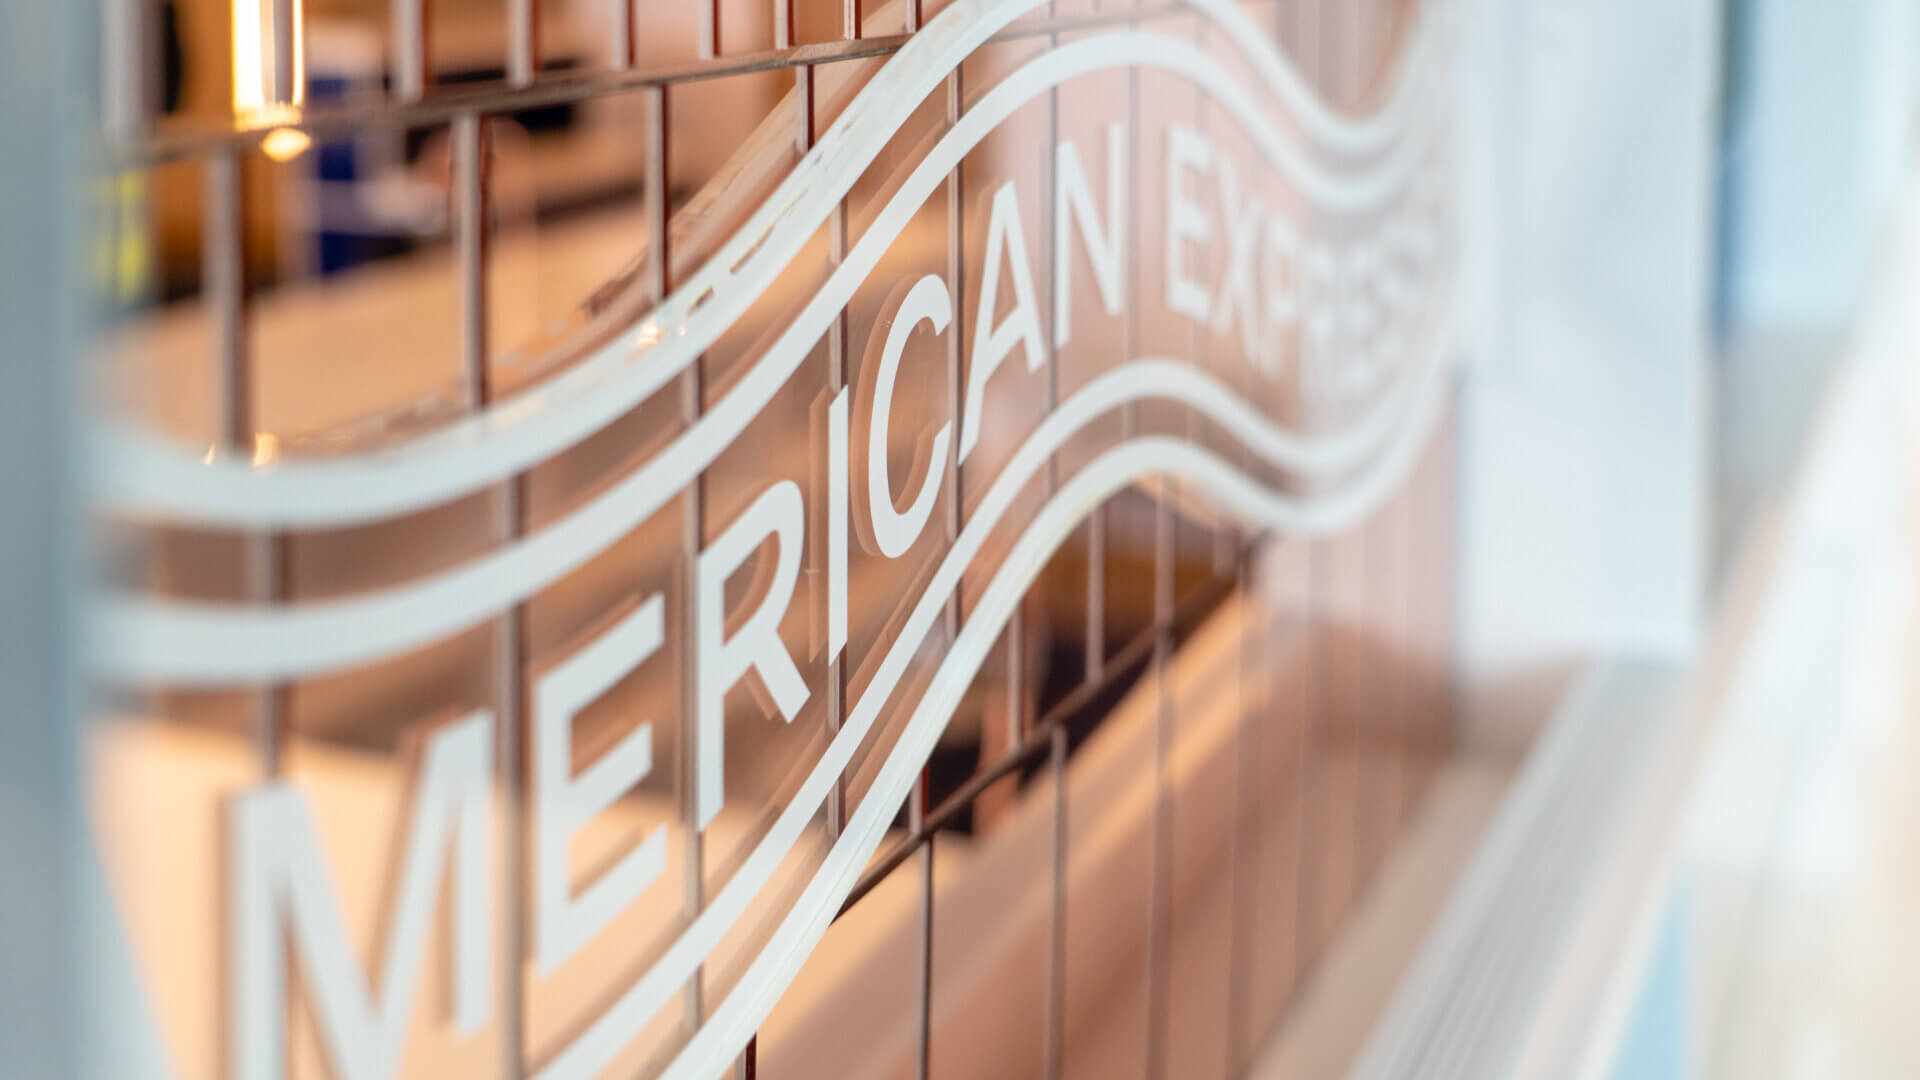 american express logo printed on glass